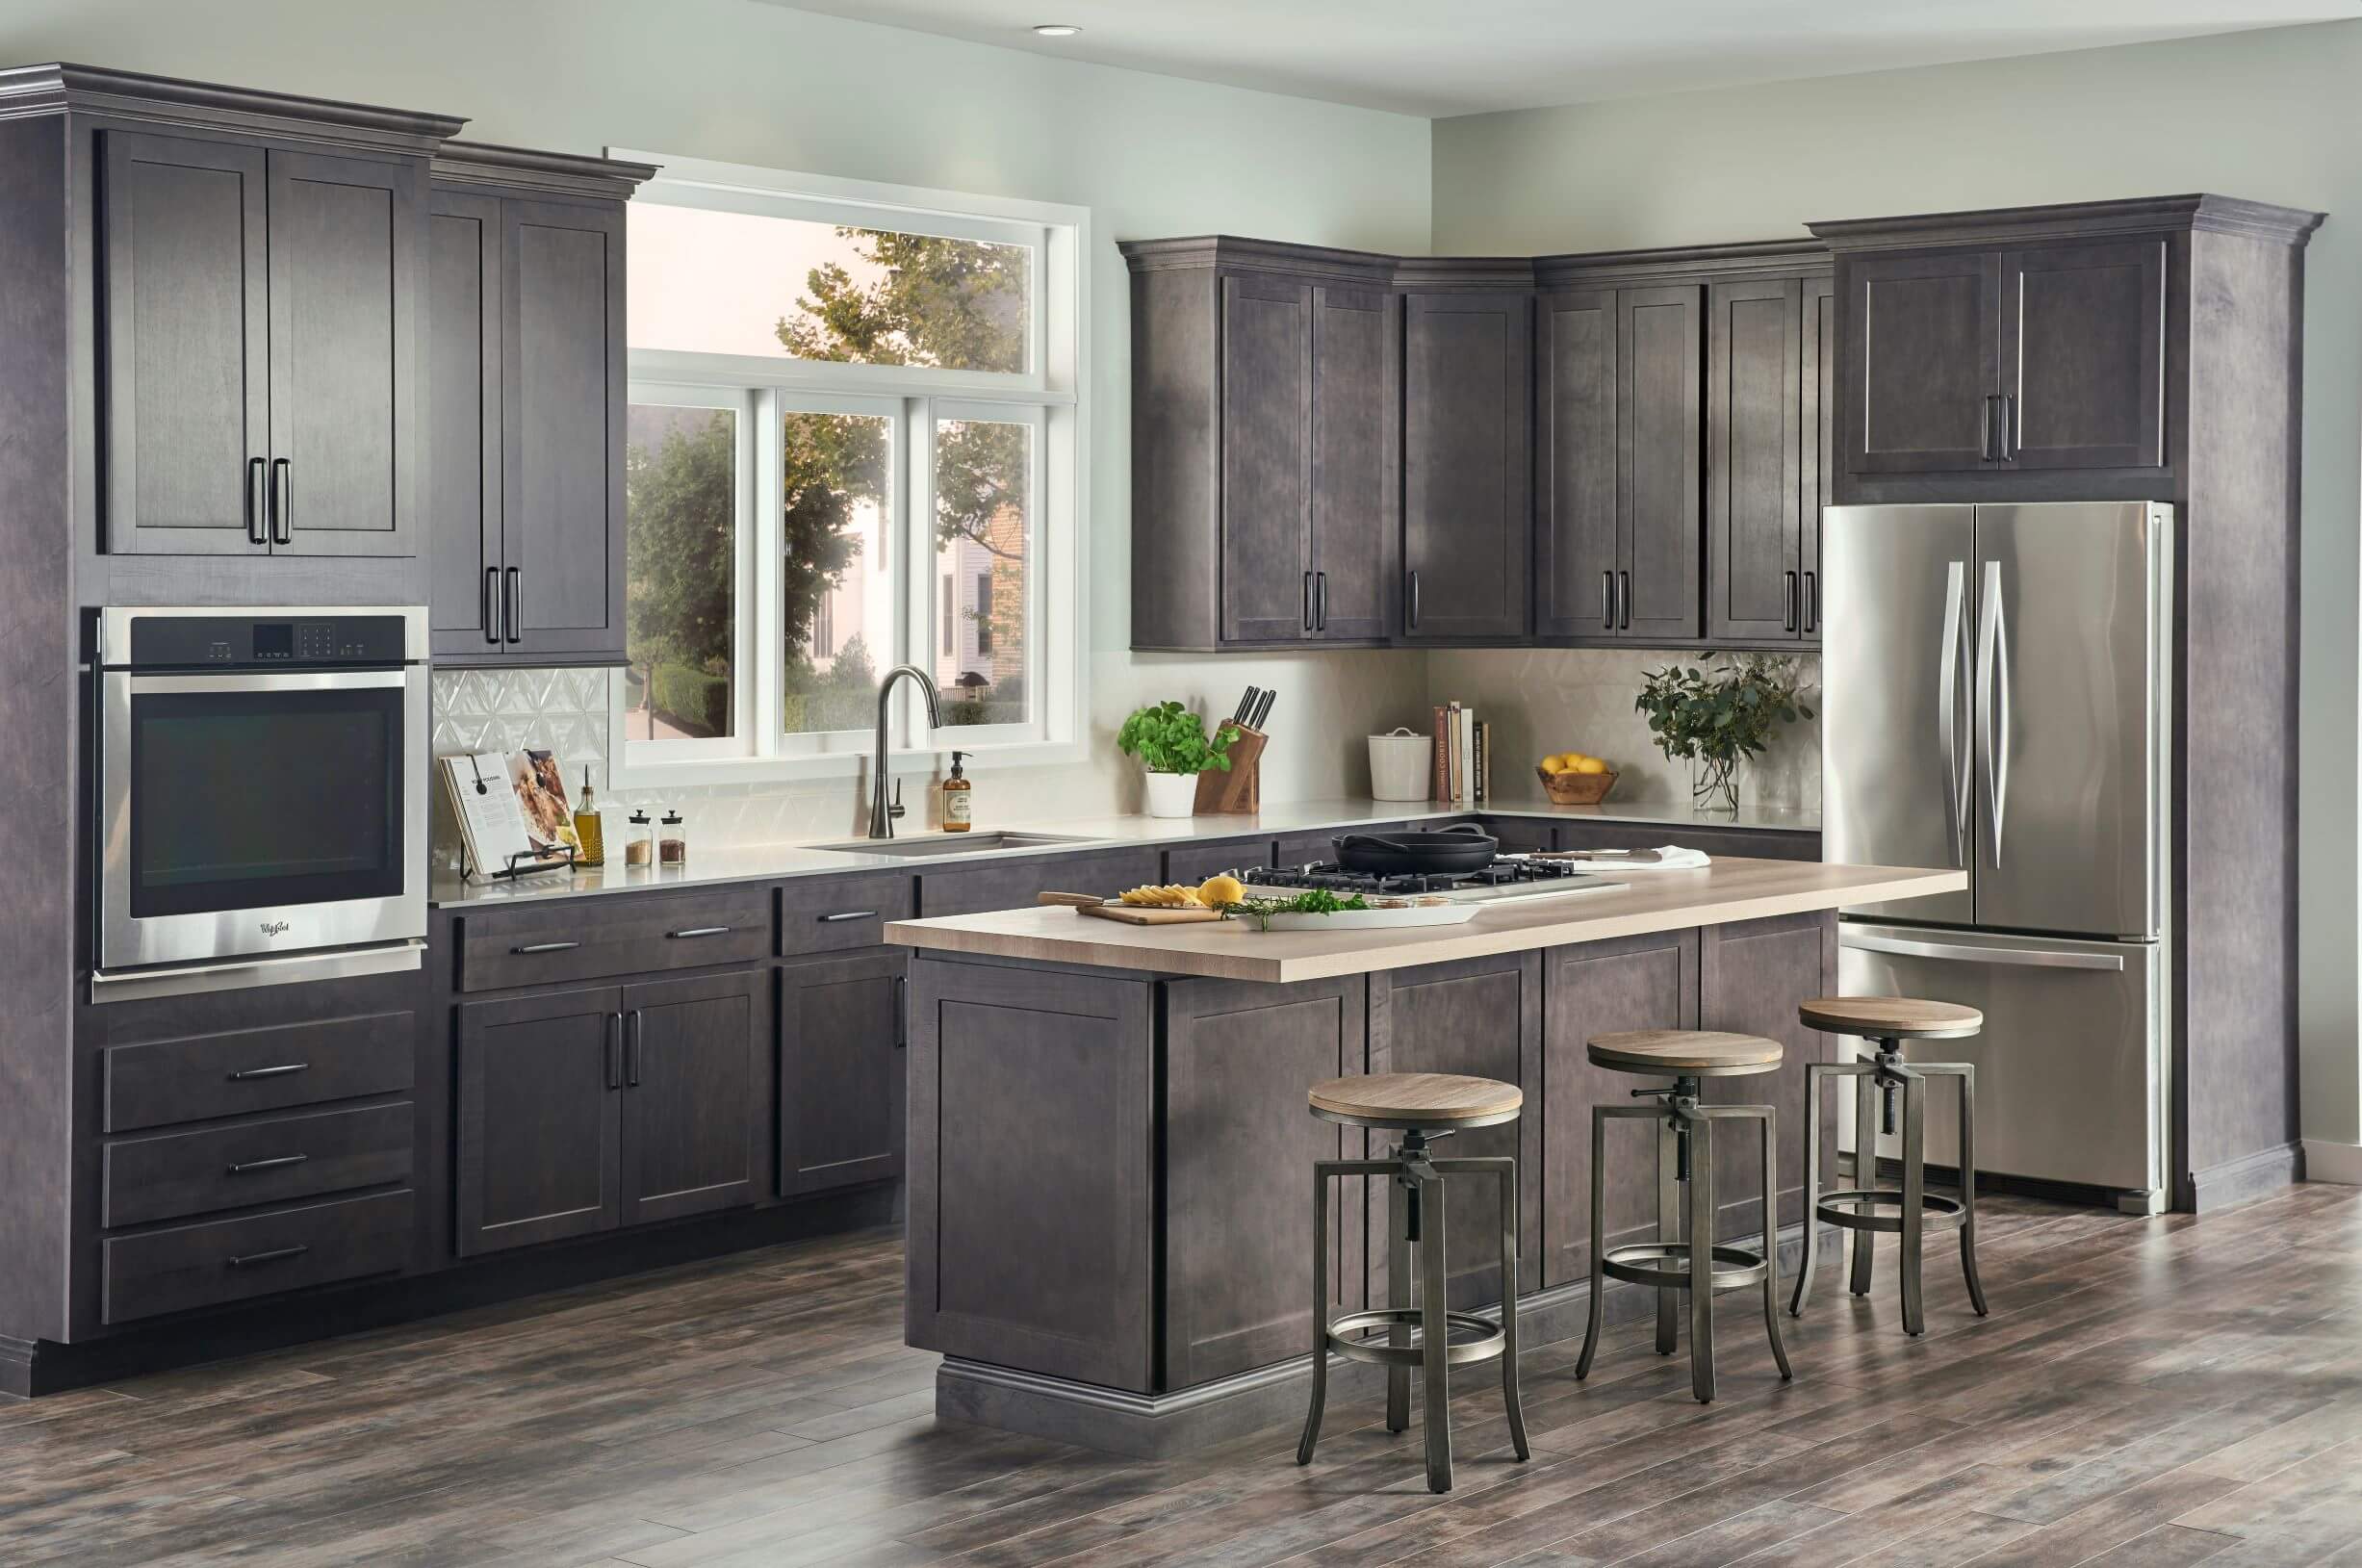 All of Our Kitchen Cabinet Styles Come from Wolf Classic Cabinets